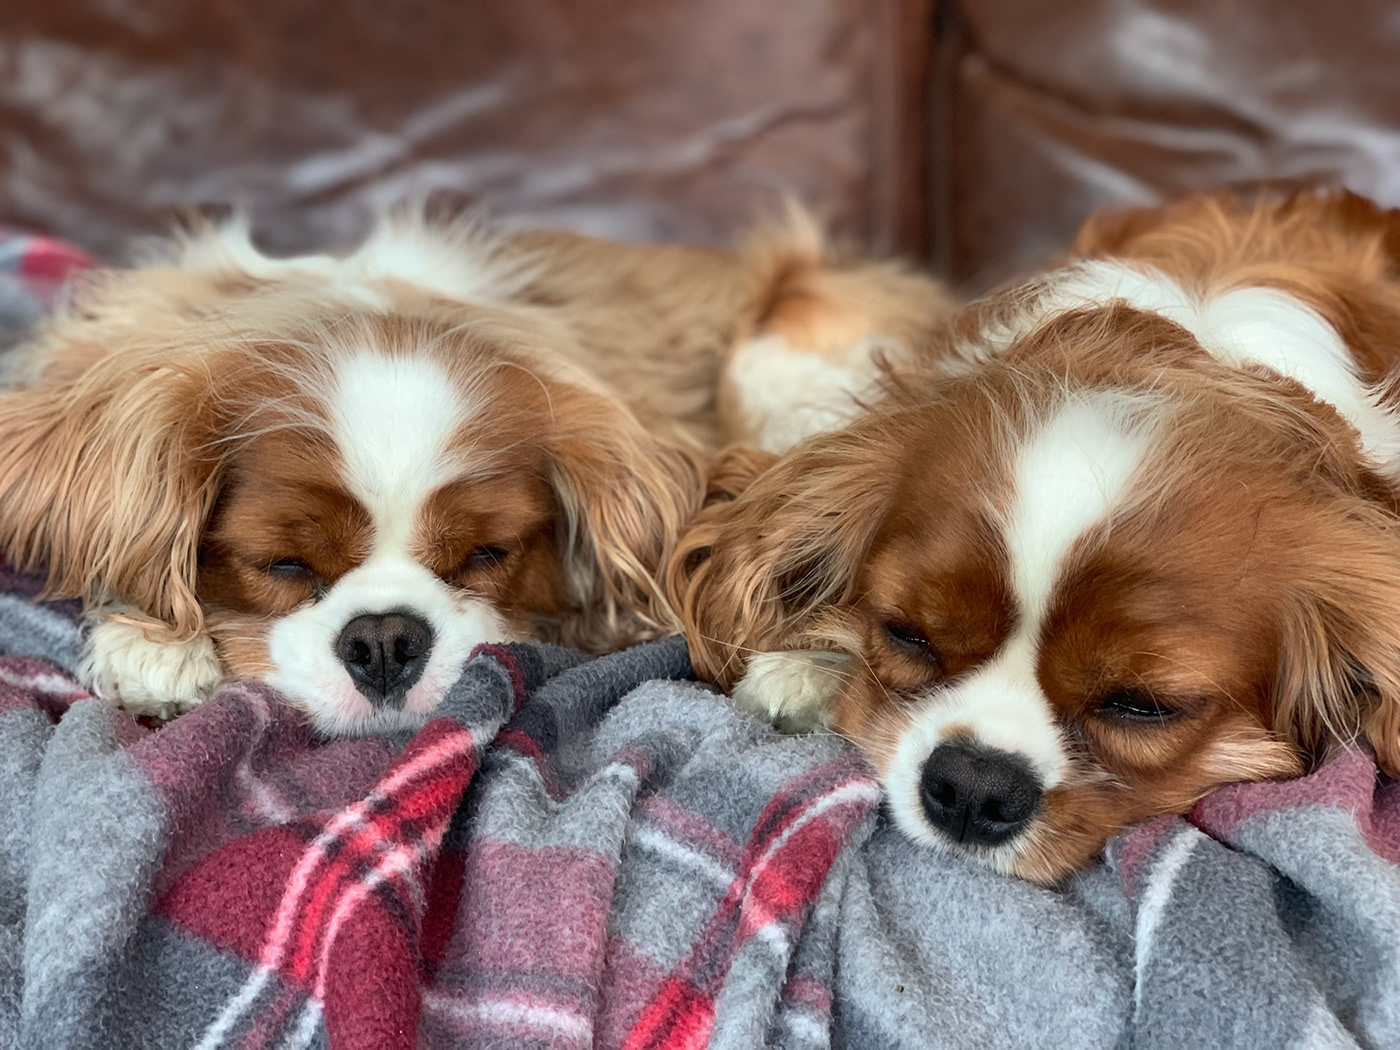 Cavalier King Charles puppy portrait beauty photographer photoshoot sleeping cute Digital Art  brown and white